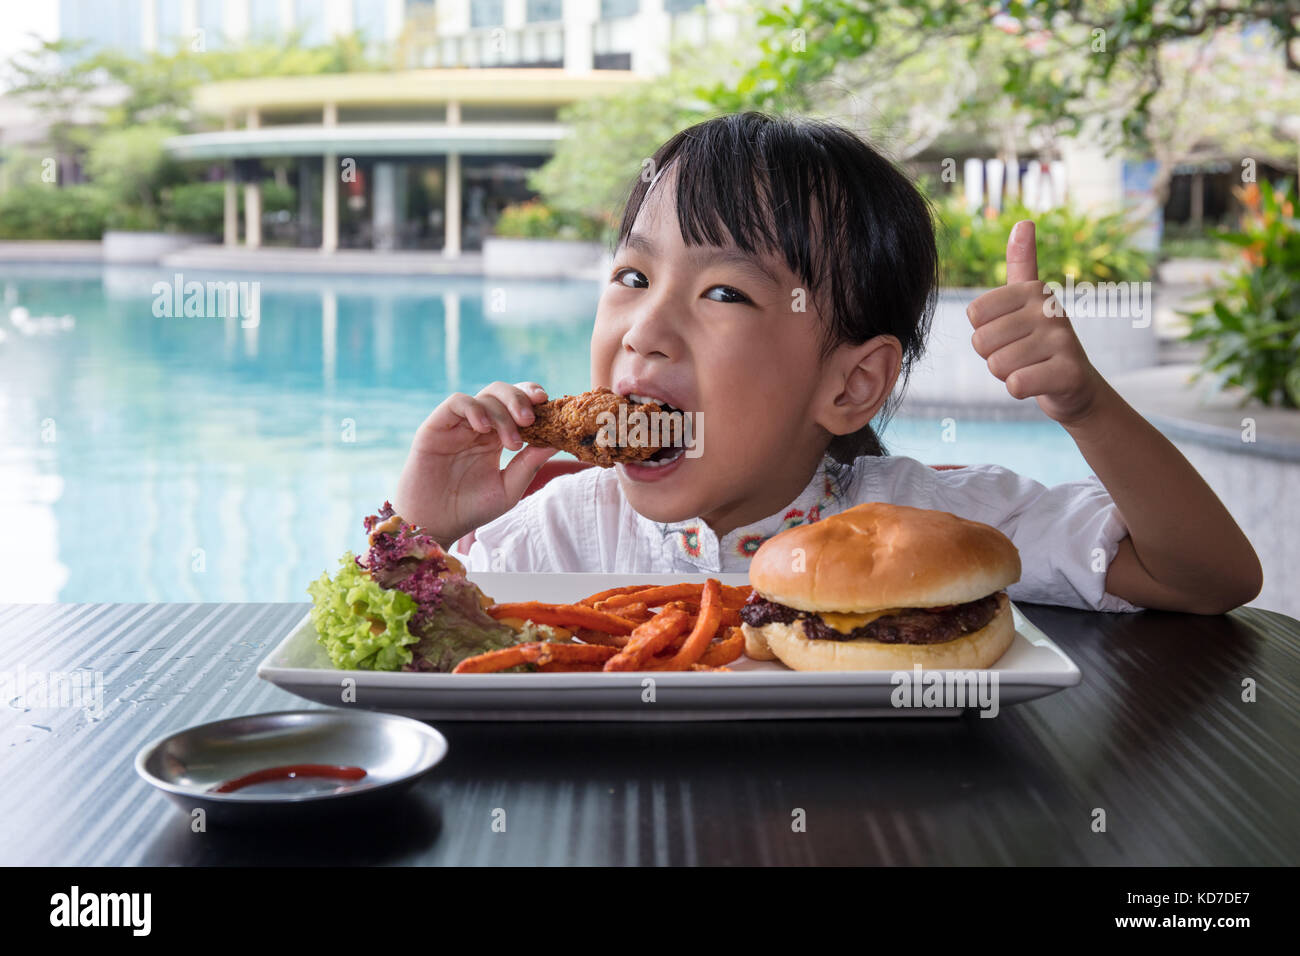 Asian Little Chinese Girl Eating Burger and Fried chicken at Outdoor Cafe Stock Photo